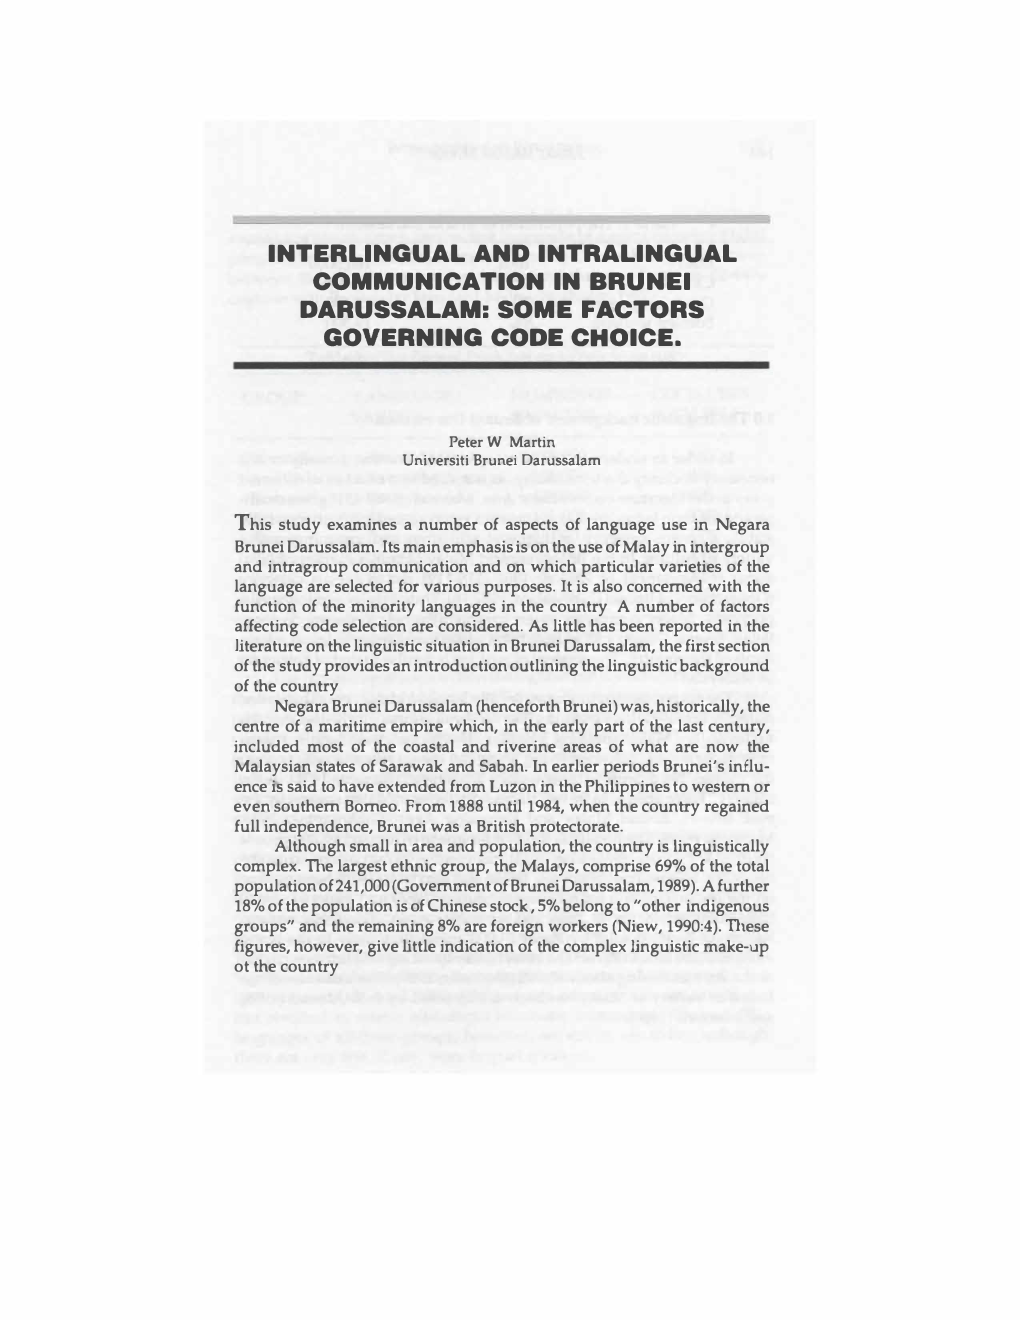 Interlingual and Intralingual Communication in Brunei Darussalam: Some Factors Governing Code Choice